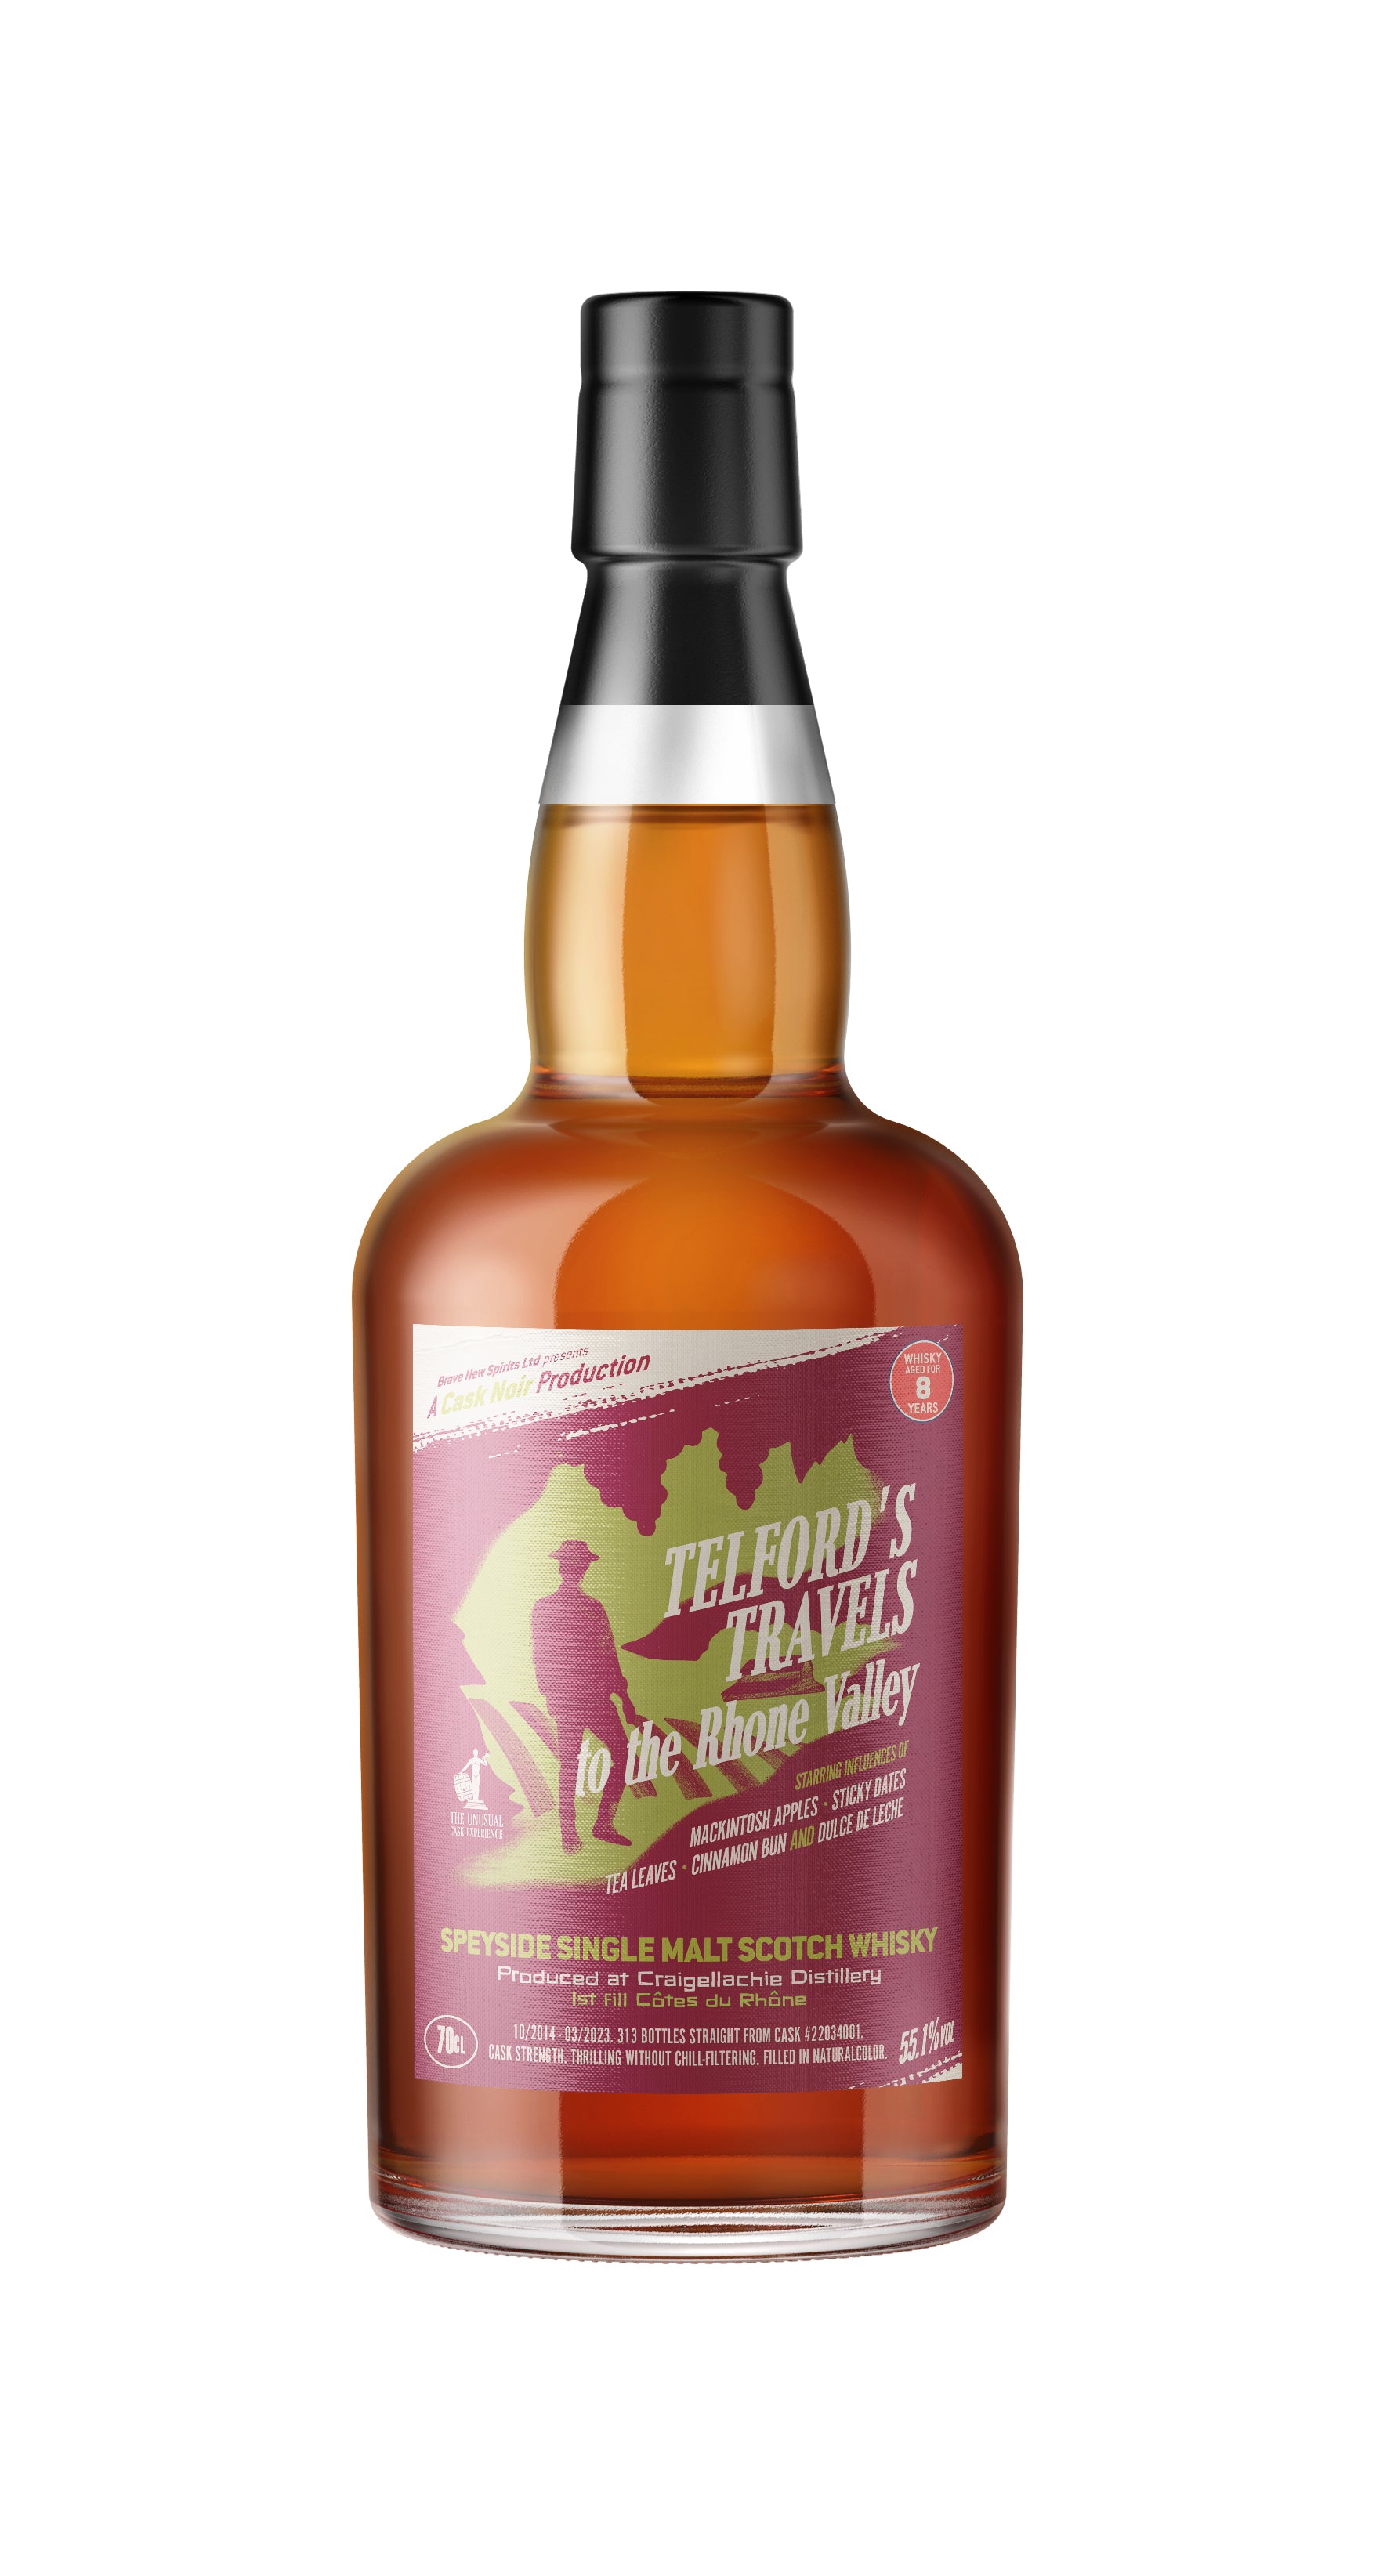 Craigellachie 8 Year Old Cask Noir Telfords Travels to The Rhone Valley Single Malt Scotch Whisky - 70cl 55.1%